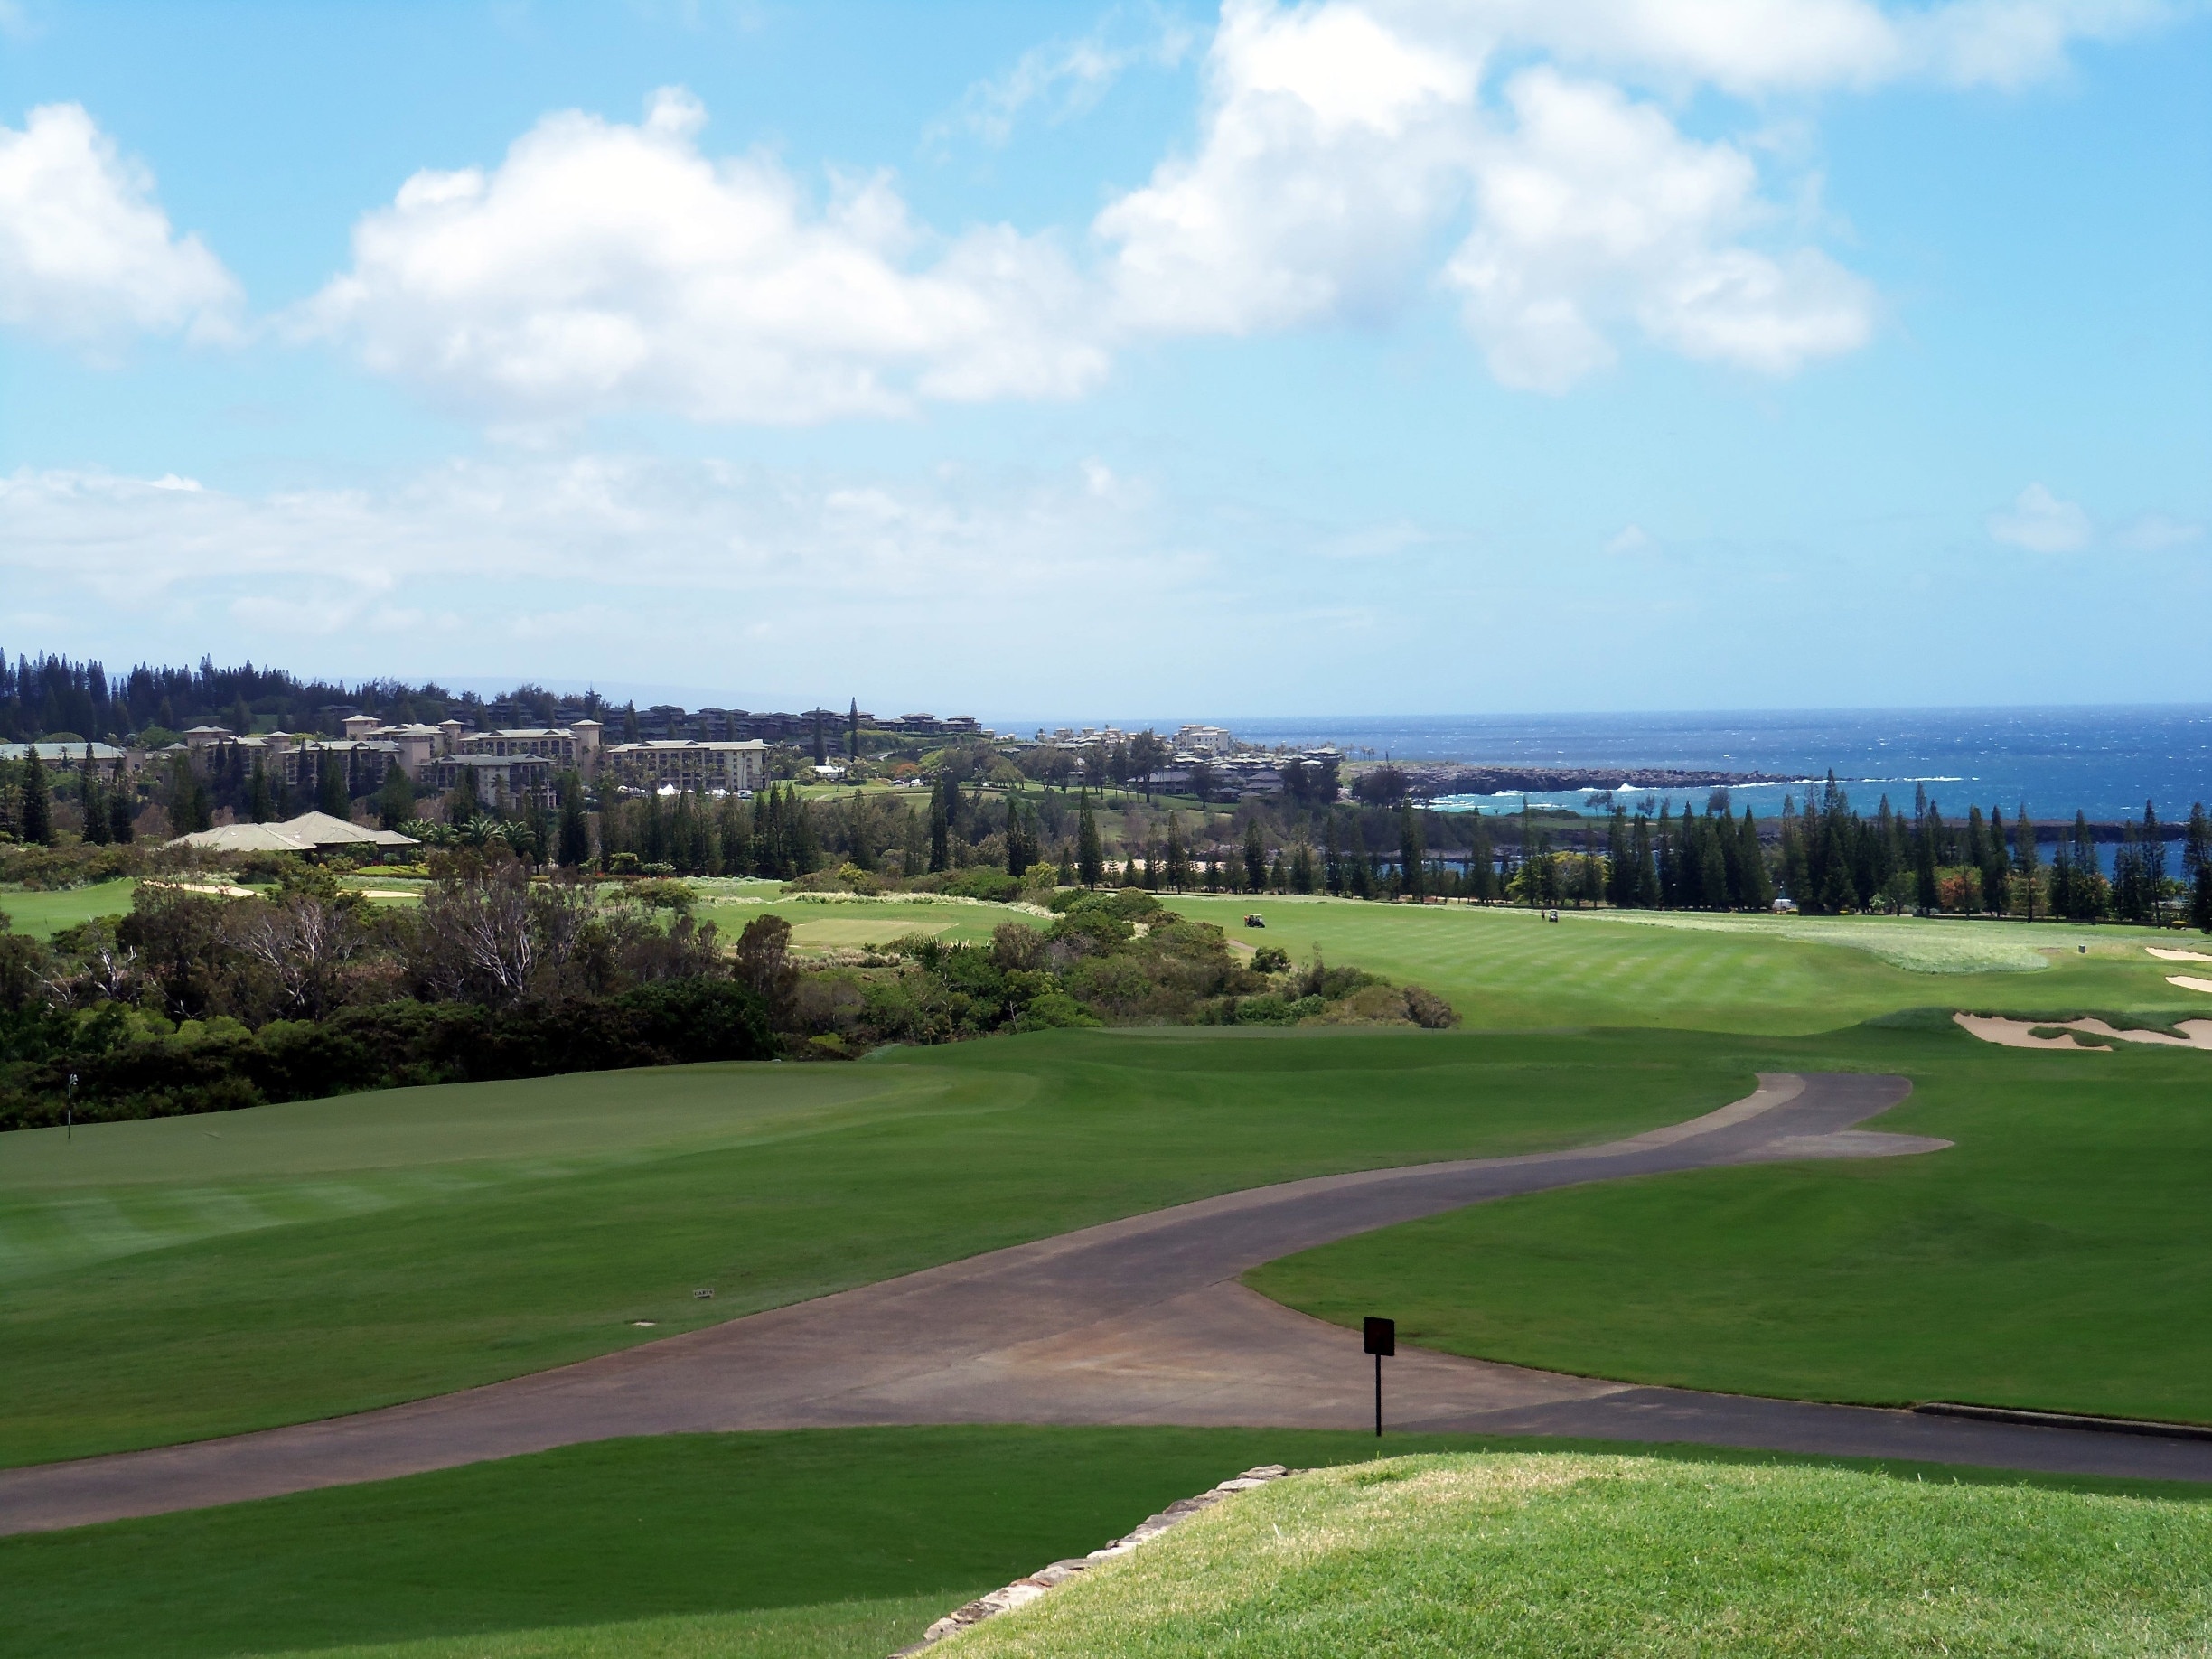 One of Hawaii's highlights are the fabulous golf courses.  I've been lucky to play on several of them on the different islands.  The Plantation Course has incredible views and challenging holes.  It's part of the PGA Tour.  I hope I didn't leave too much divots!